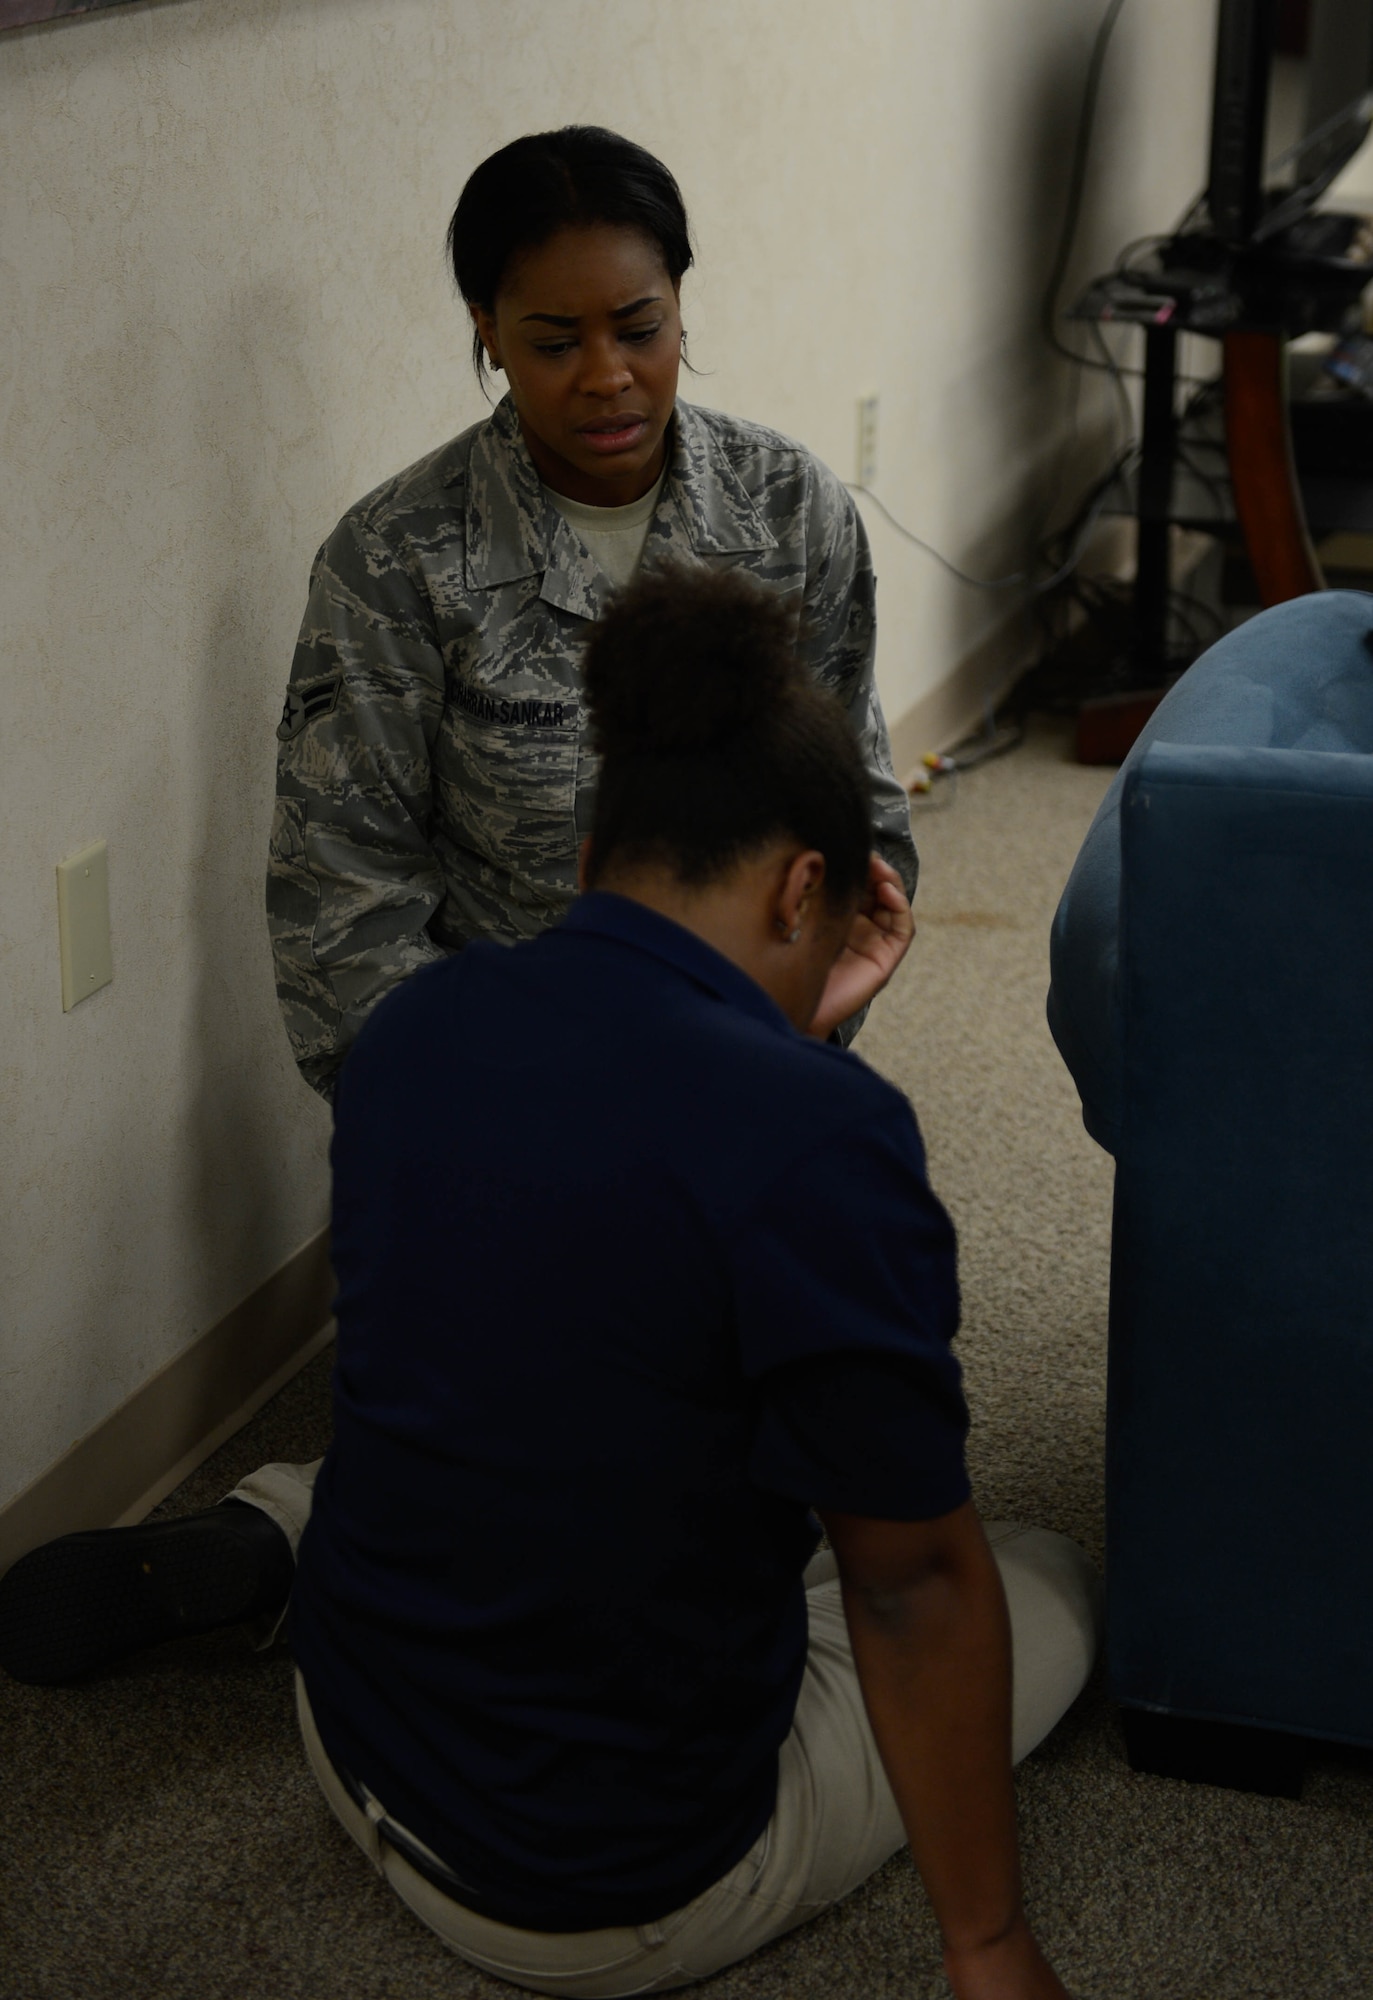 Theater group shares prevention, response message across Air Force